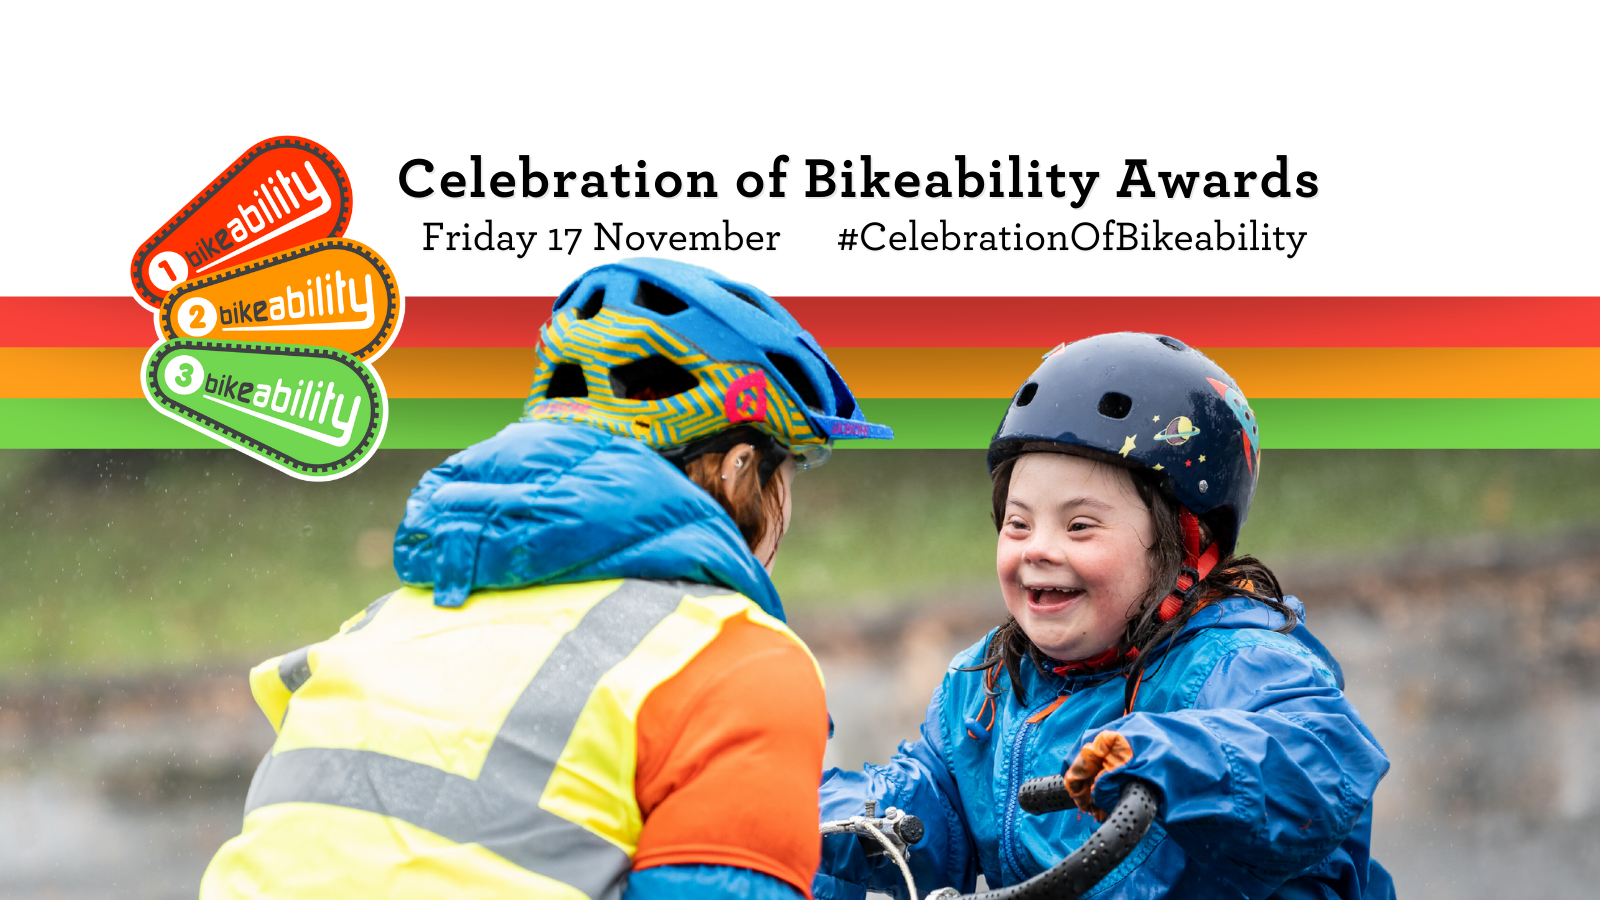 Celebration of Bikeability Awards Friday 17 November. A Bikeability instructor is talking to a girl on a tricycle who has a big smile on her face